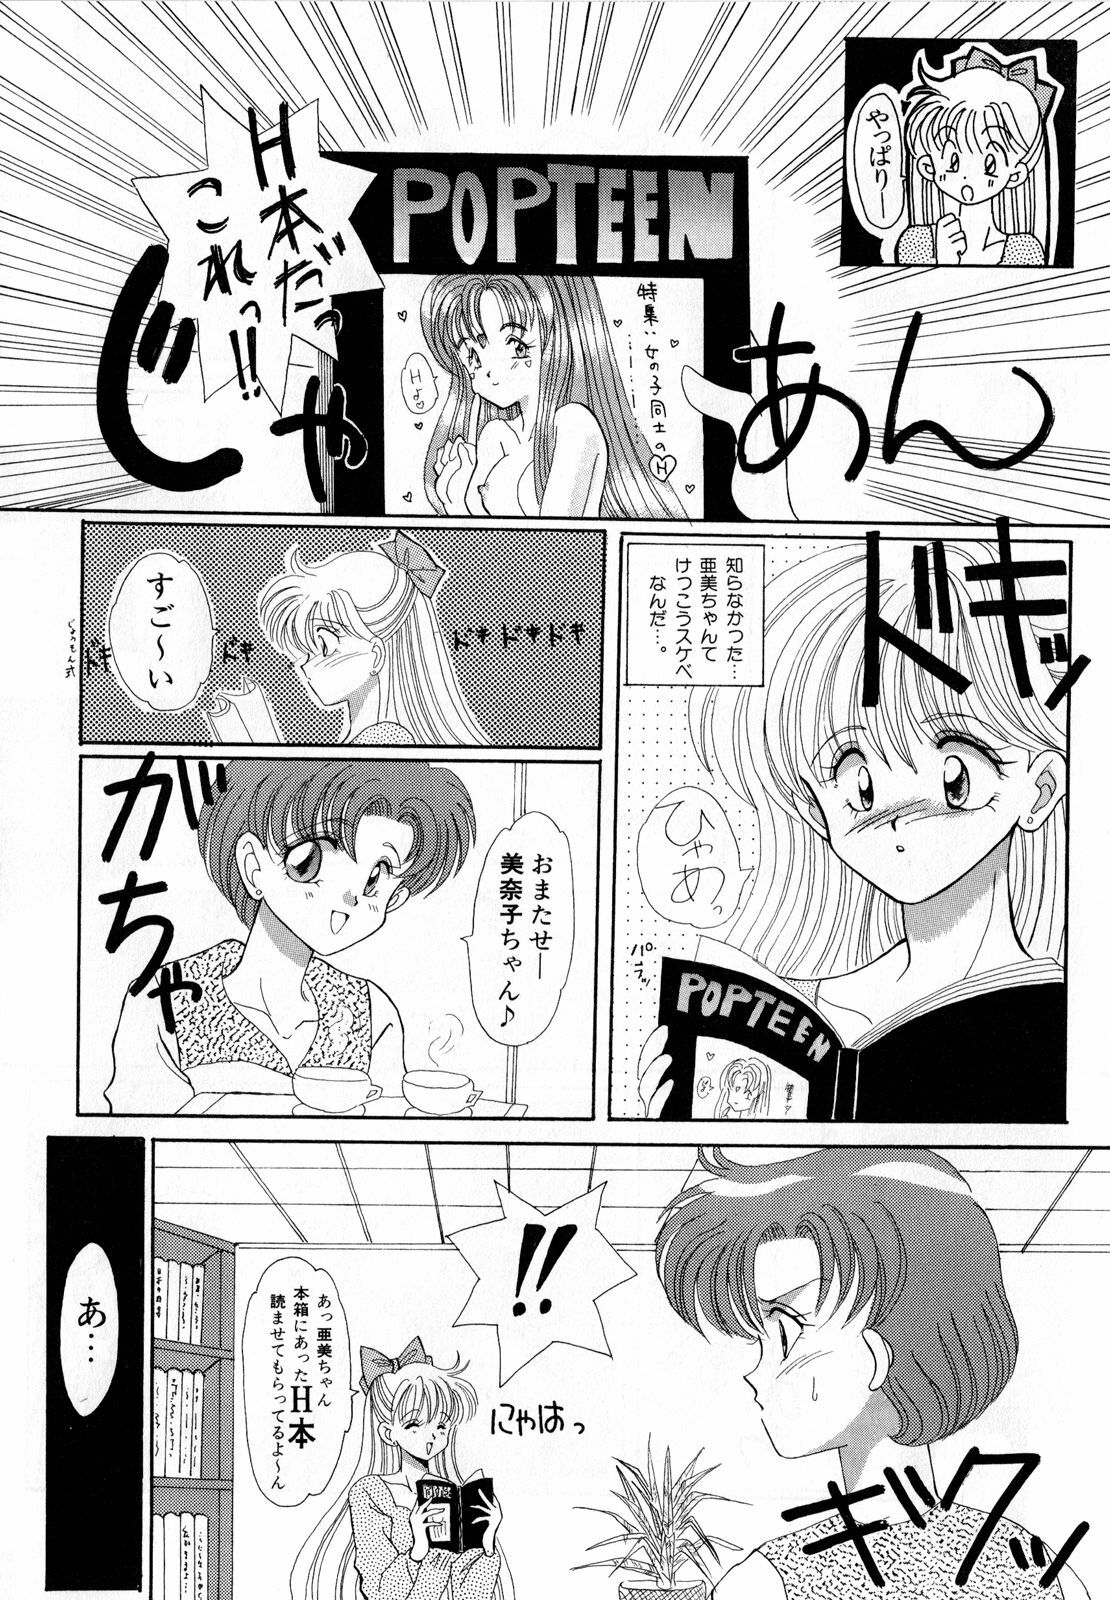 [Anthology] Lunatic Party 3 (Sailor Moon) page 43 full